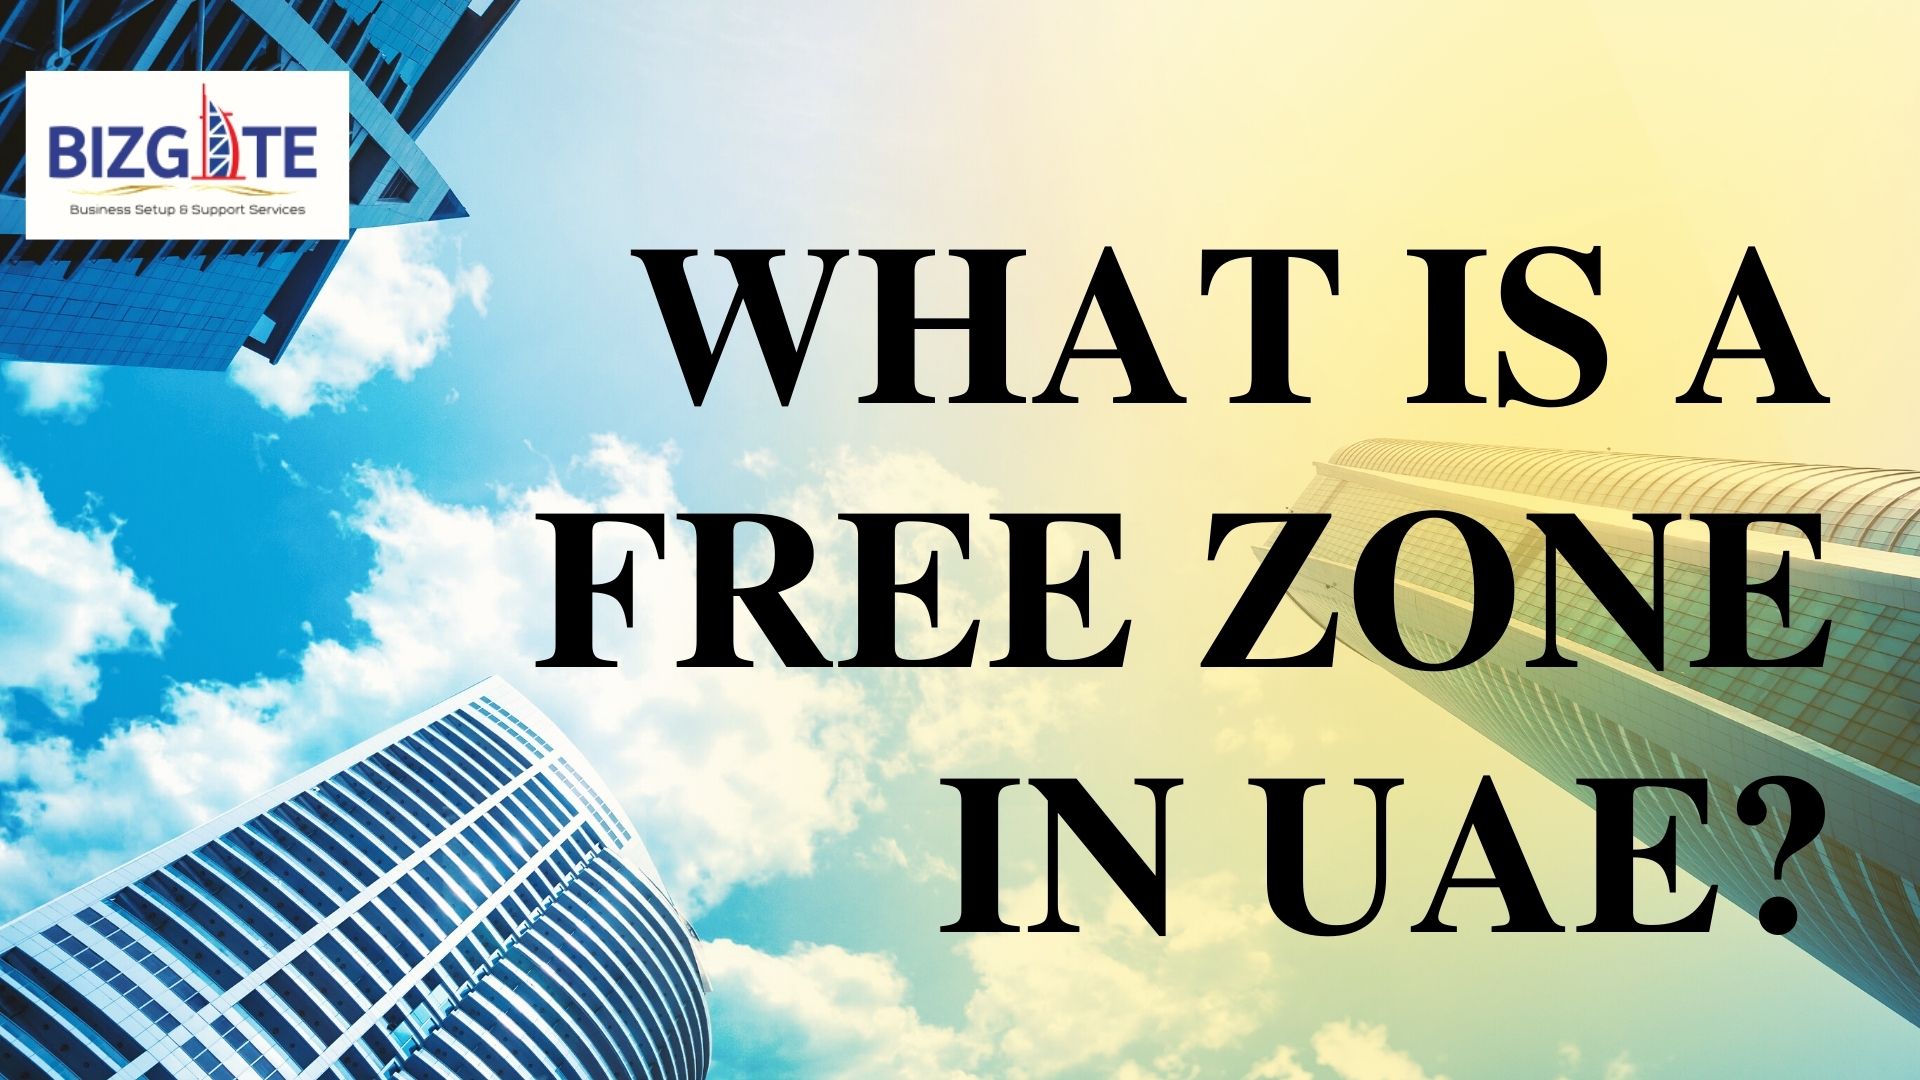 You are currently viewing What is a free zone in UAE? | Business Setup in Dubai